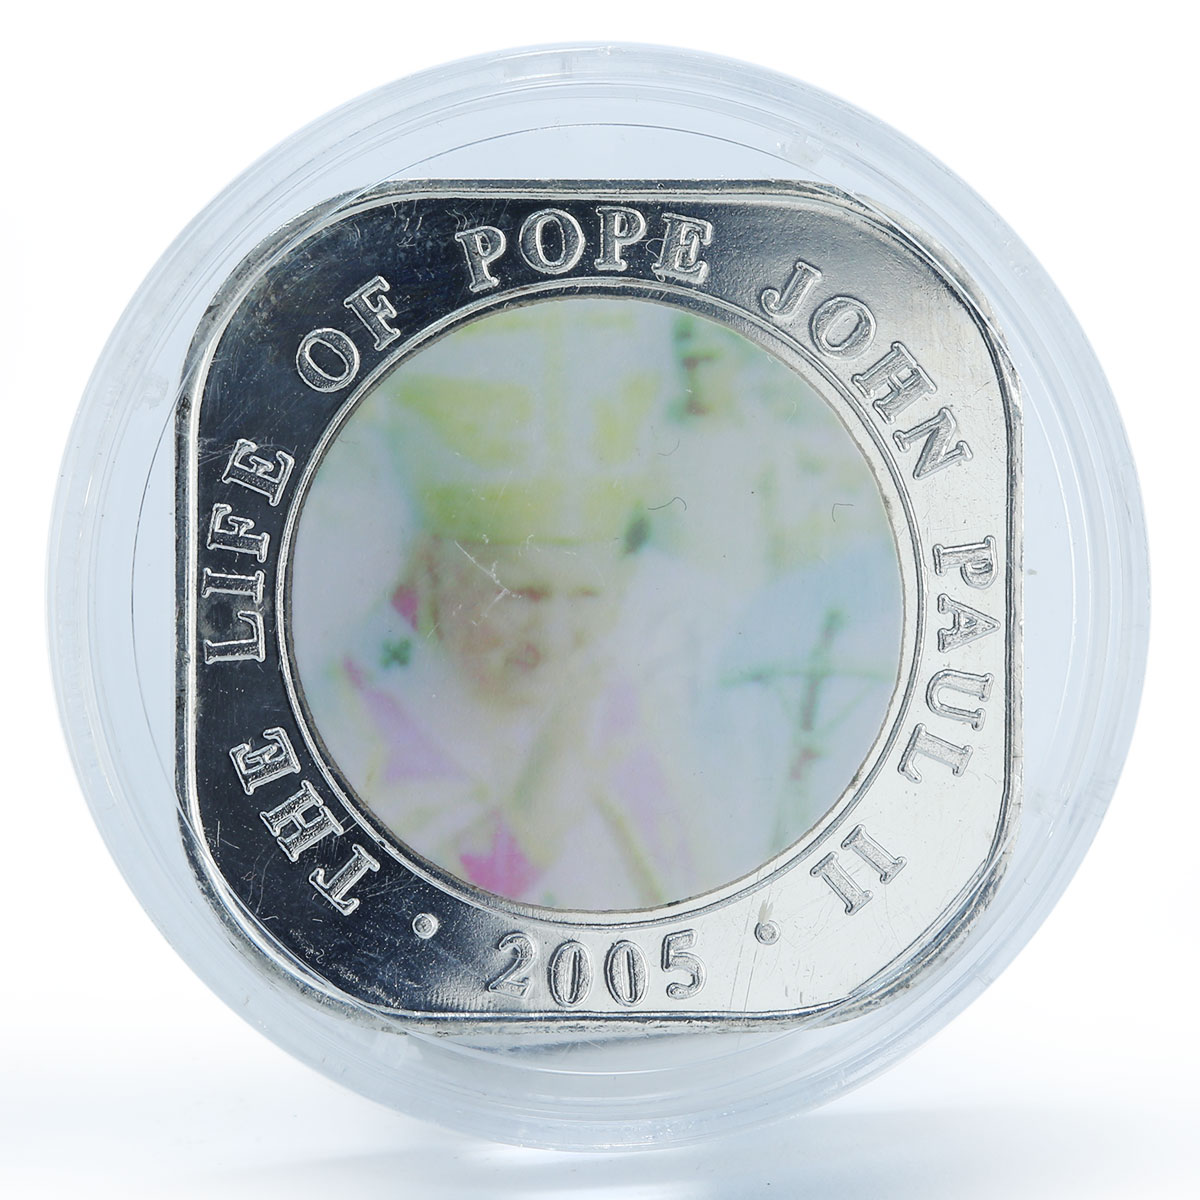 Somali 500 shillings Pope John Paul II colorized silver plated coin 2005